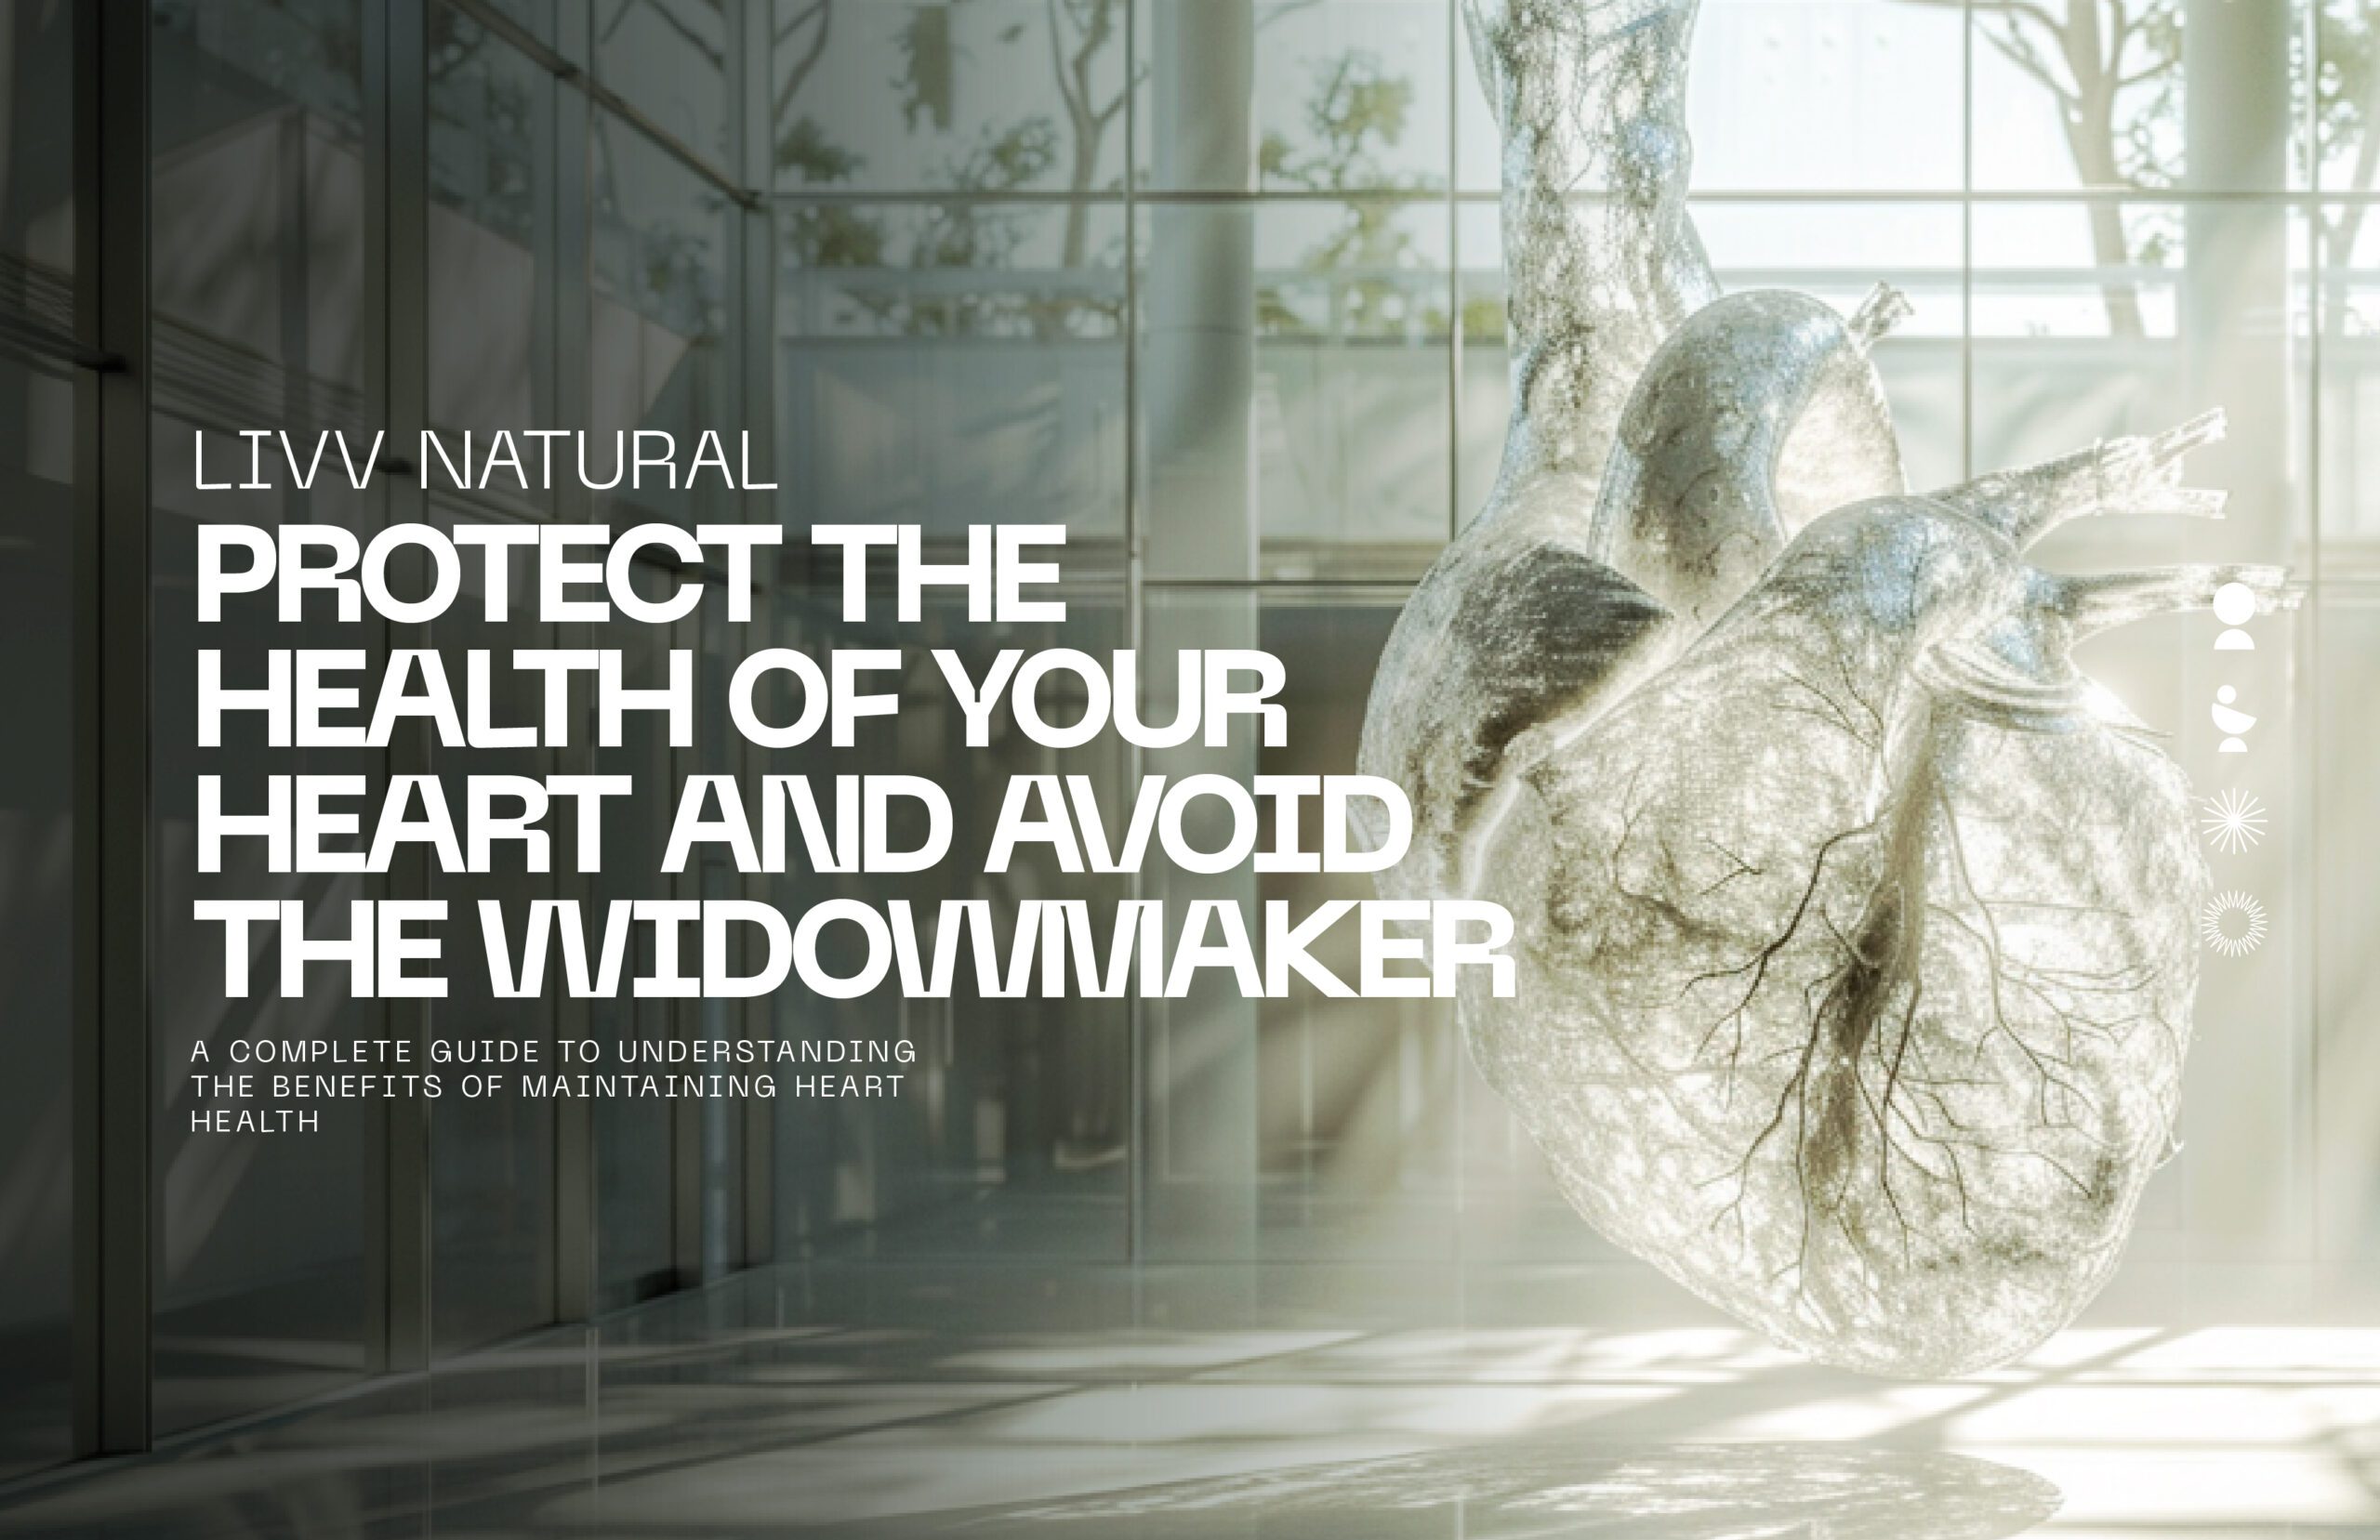 How to protect your heart health – avoiding the widow maker